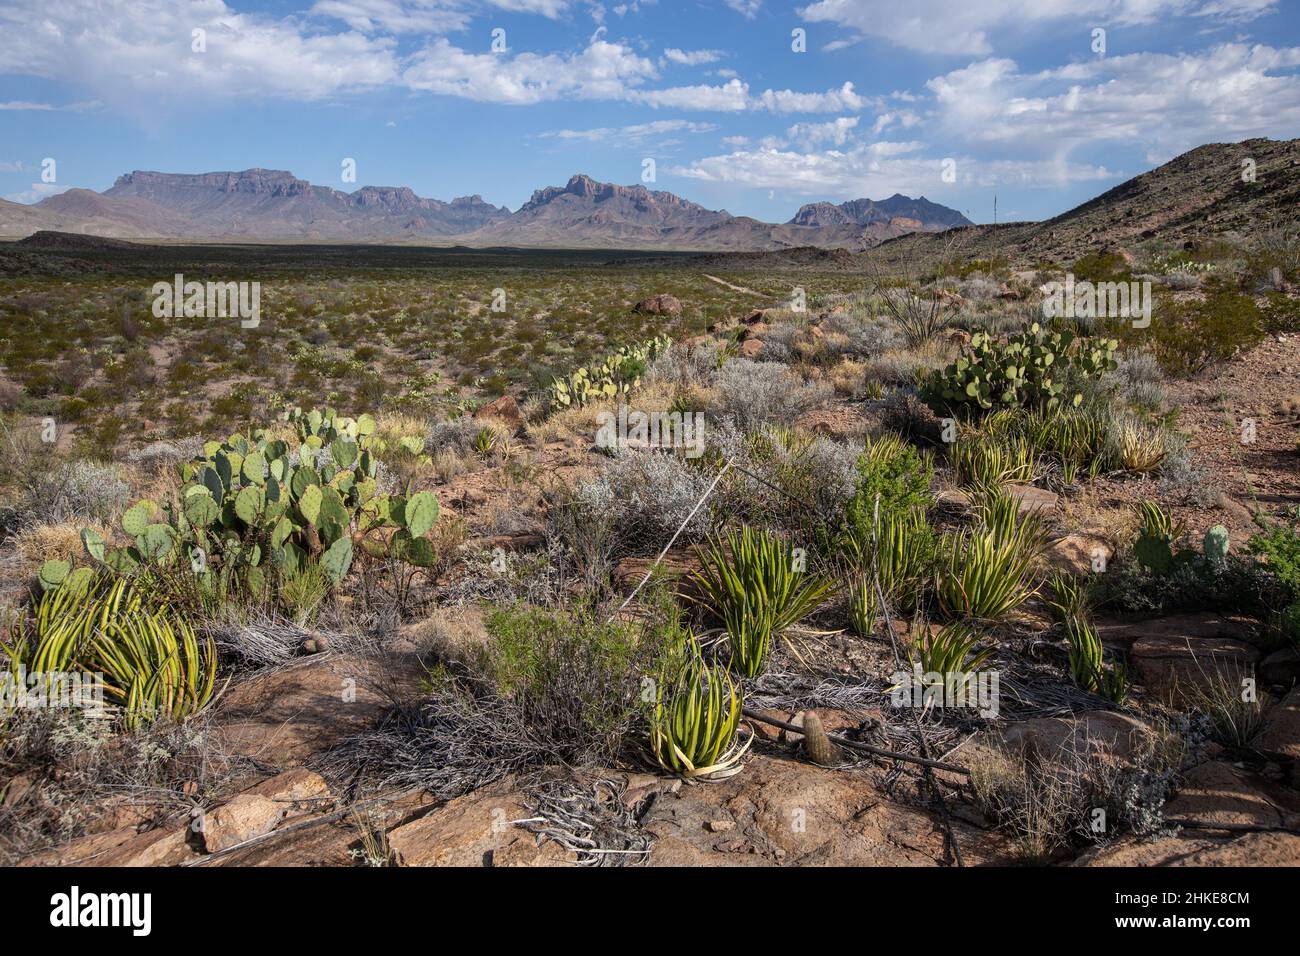 Chihuahuan Desert scrub of lechuguilla, cacti, and creosote stretch for miles to the base of the Chisos Mountains in the distance. Stock Photo